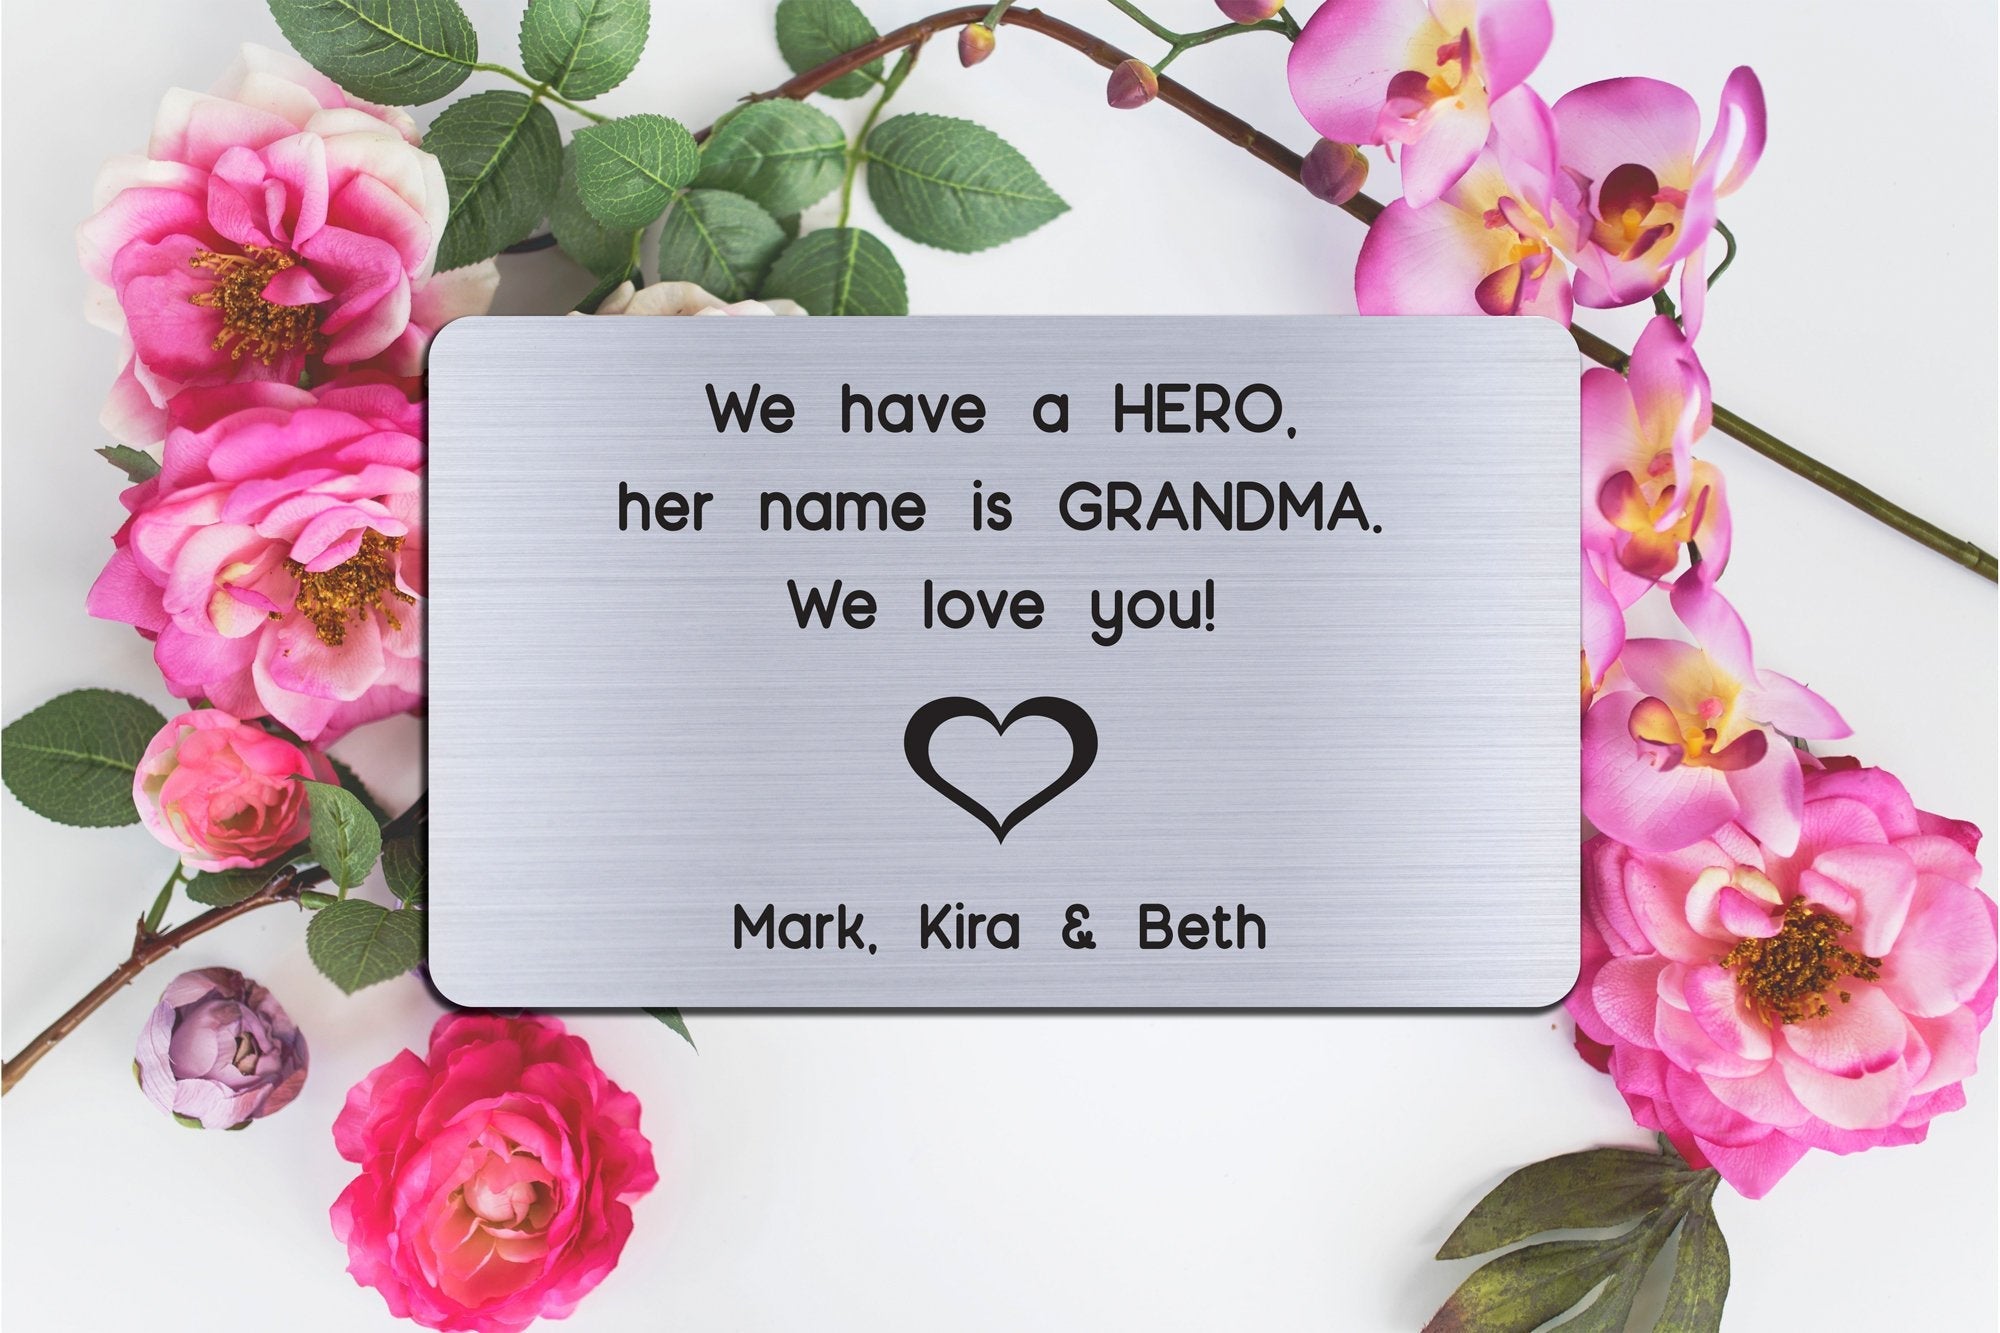 Personalized Engraved Wallet Card Insert, Gift for Grandma, Hero, From the Grand kids, Silver